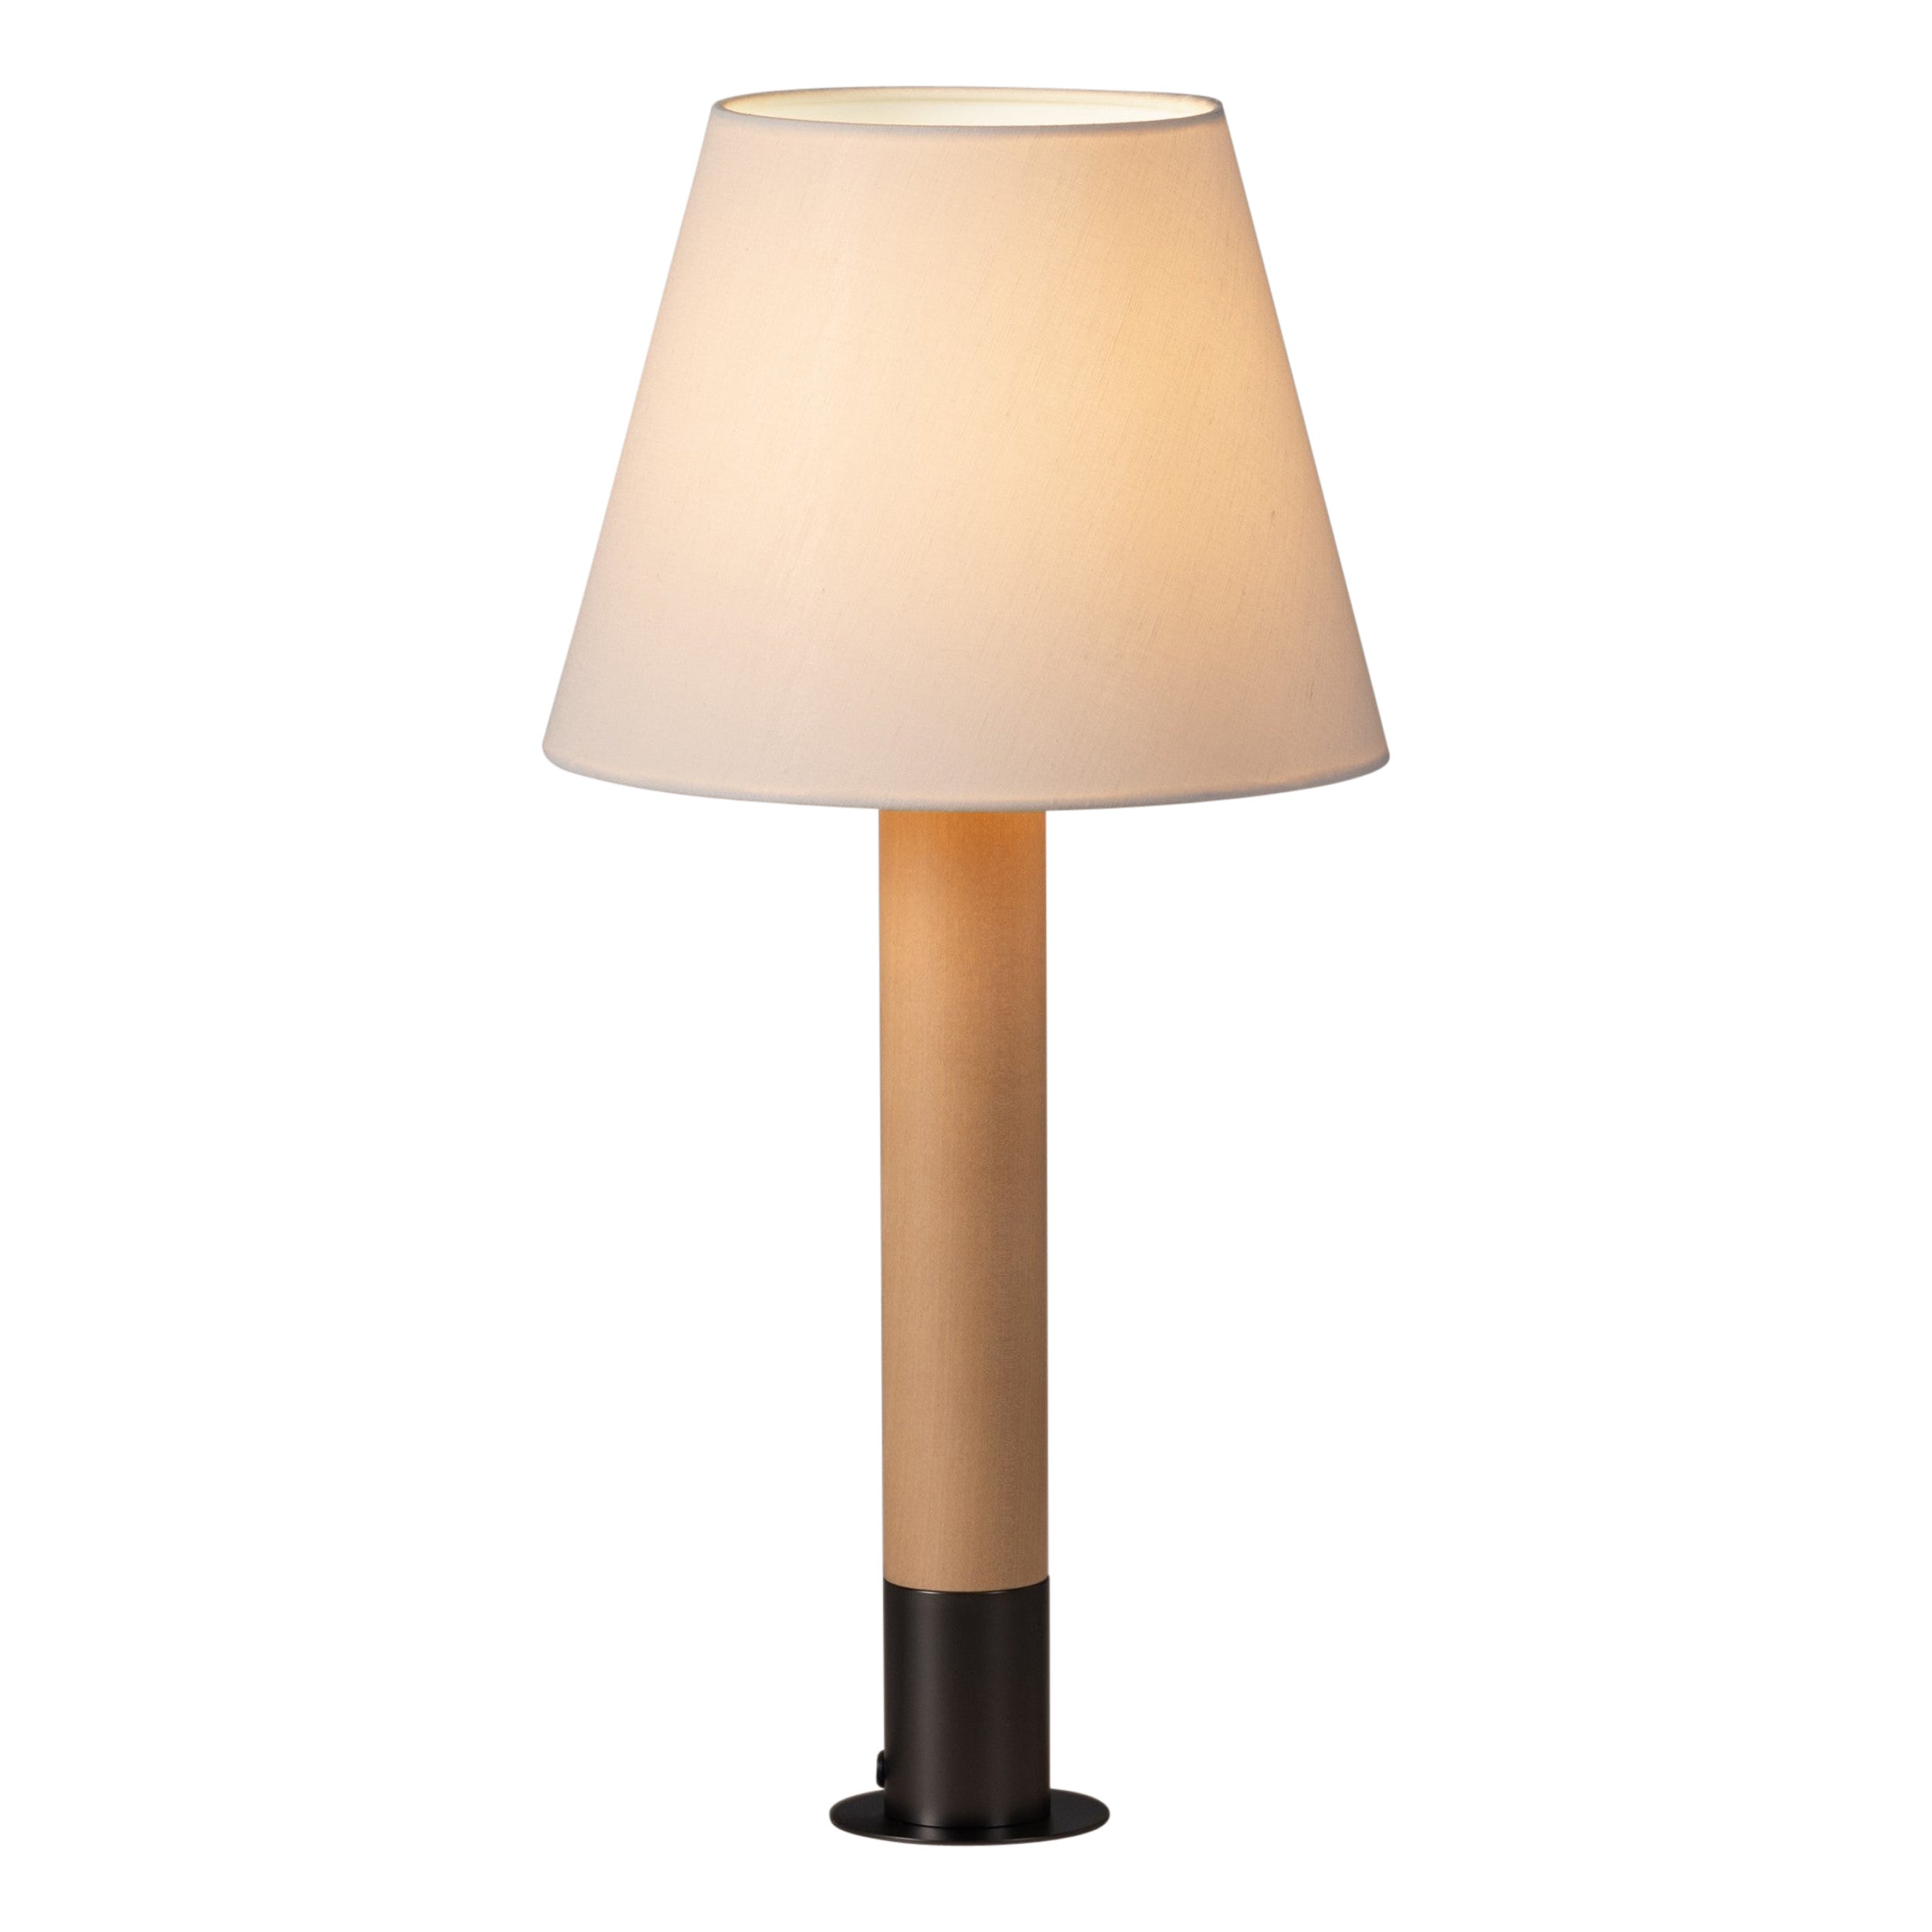 Bronze and White Básica M1 Table Lamp by Santiago Roqueta, Santa & Cole For Sale